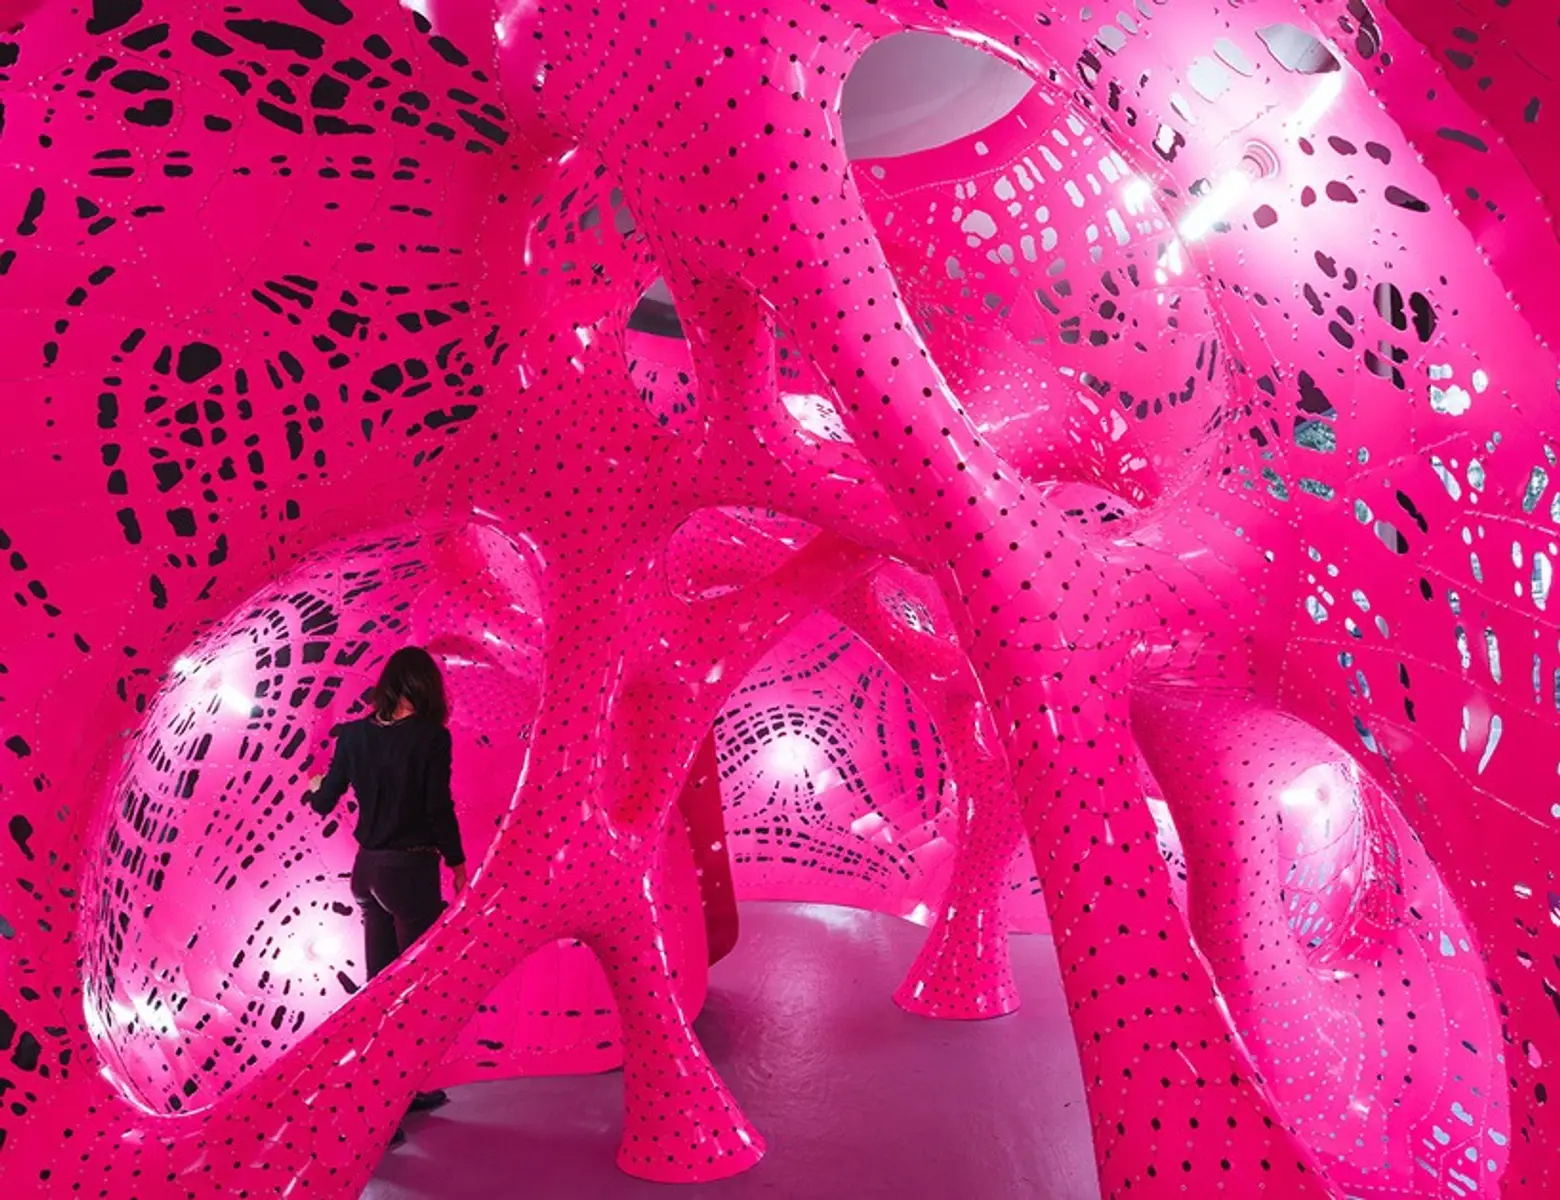 Futuristic-looking Pink Amoeba by THEVERYMANY Wants You to Explore Its Insides